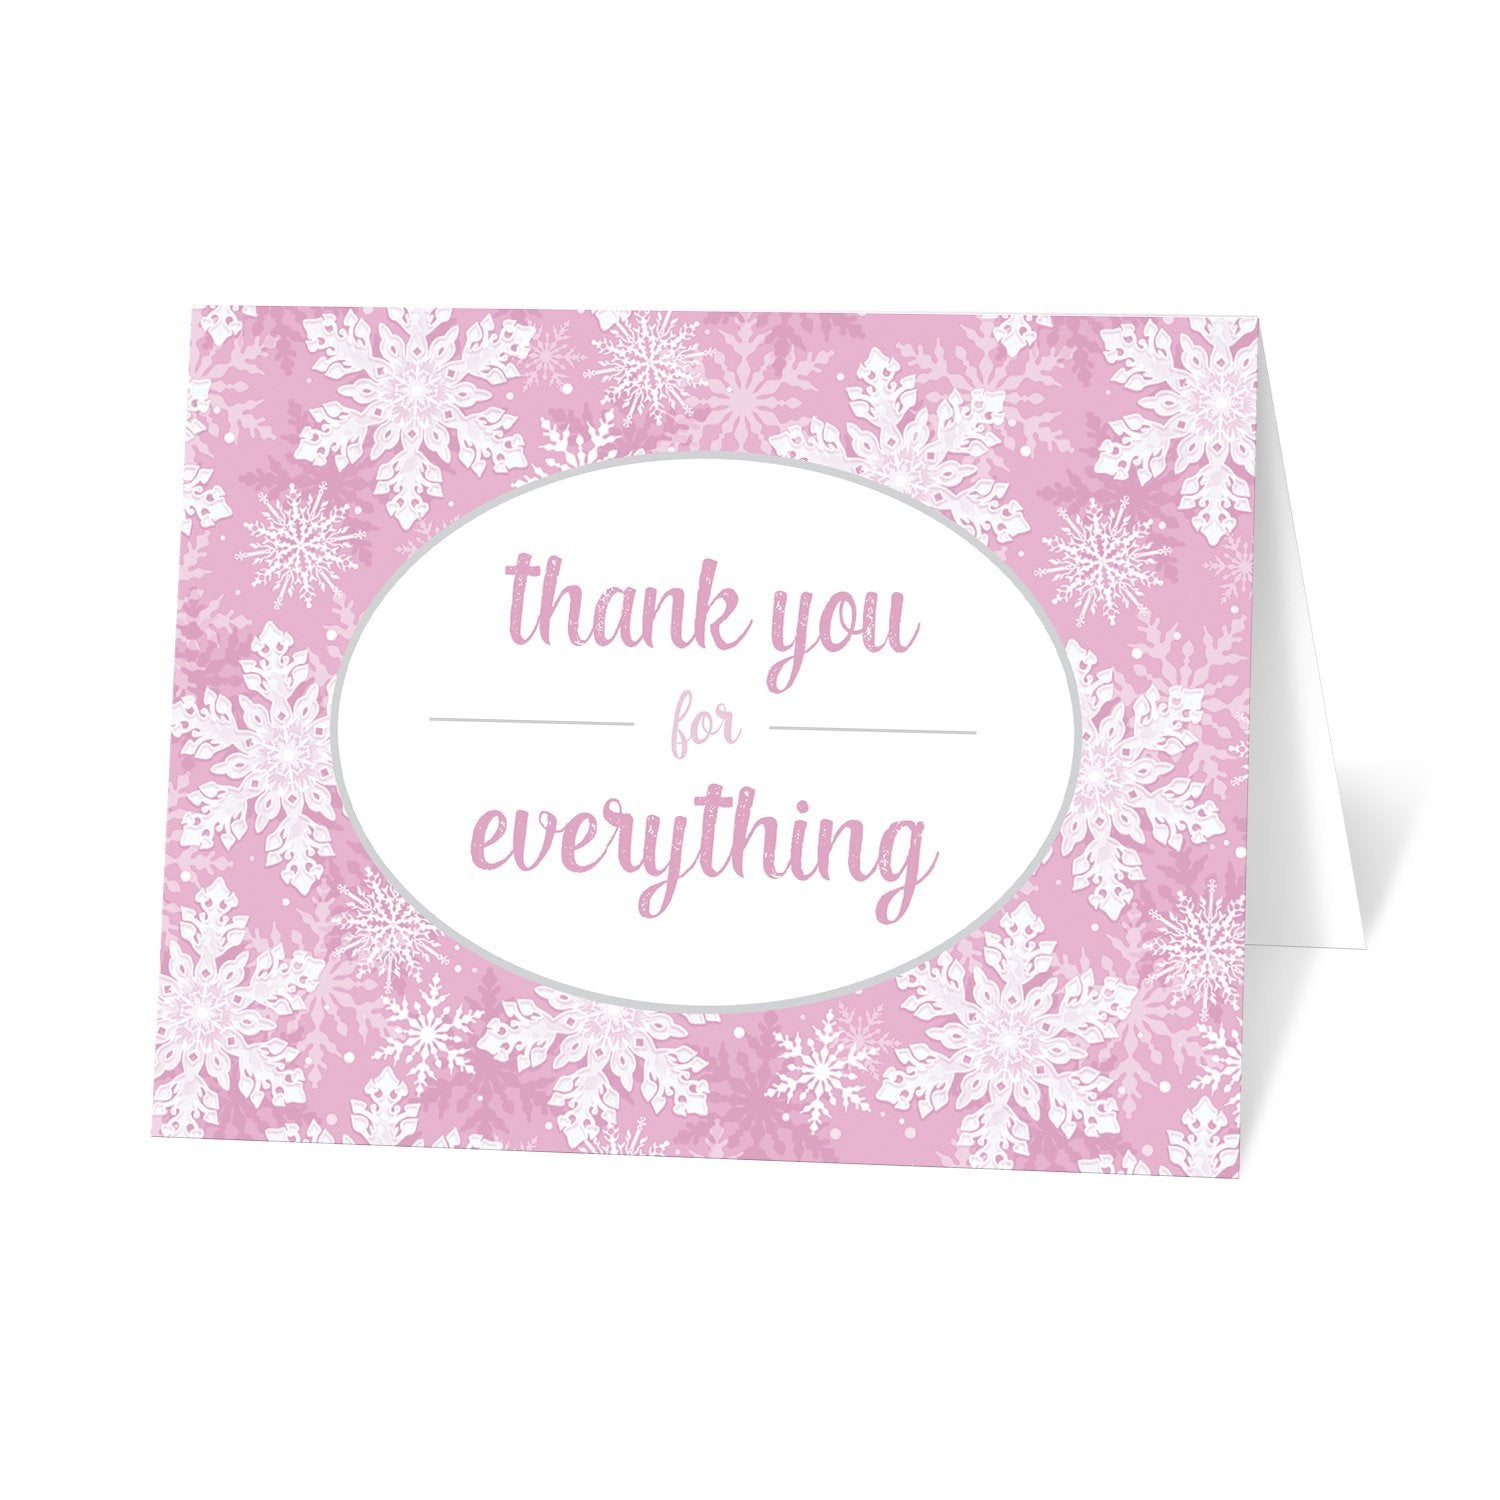 Pink Snowflake Winter Thank You Cards at Artistically Invited